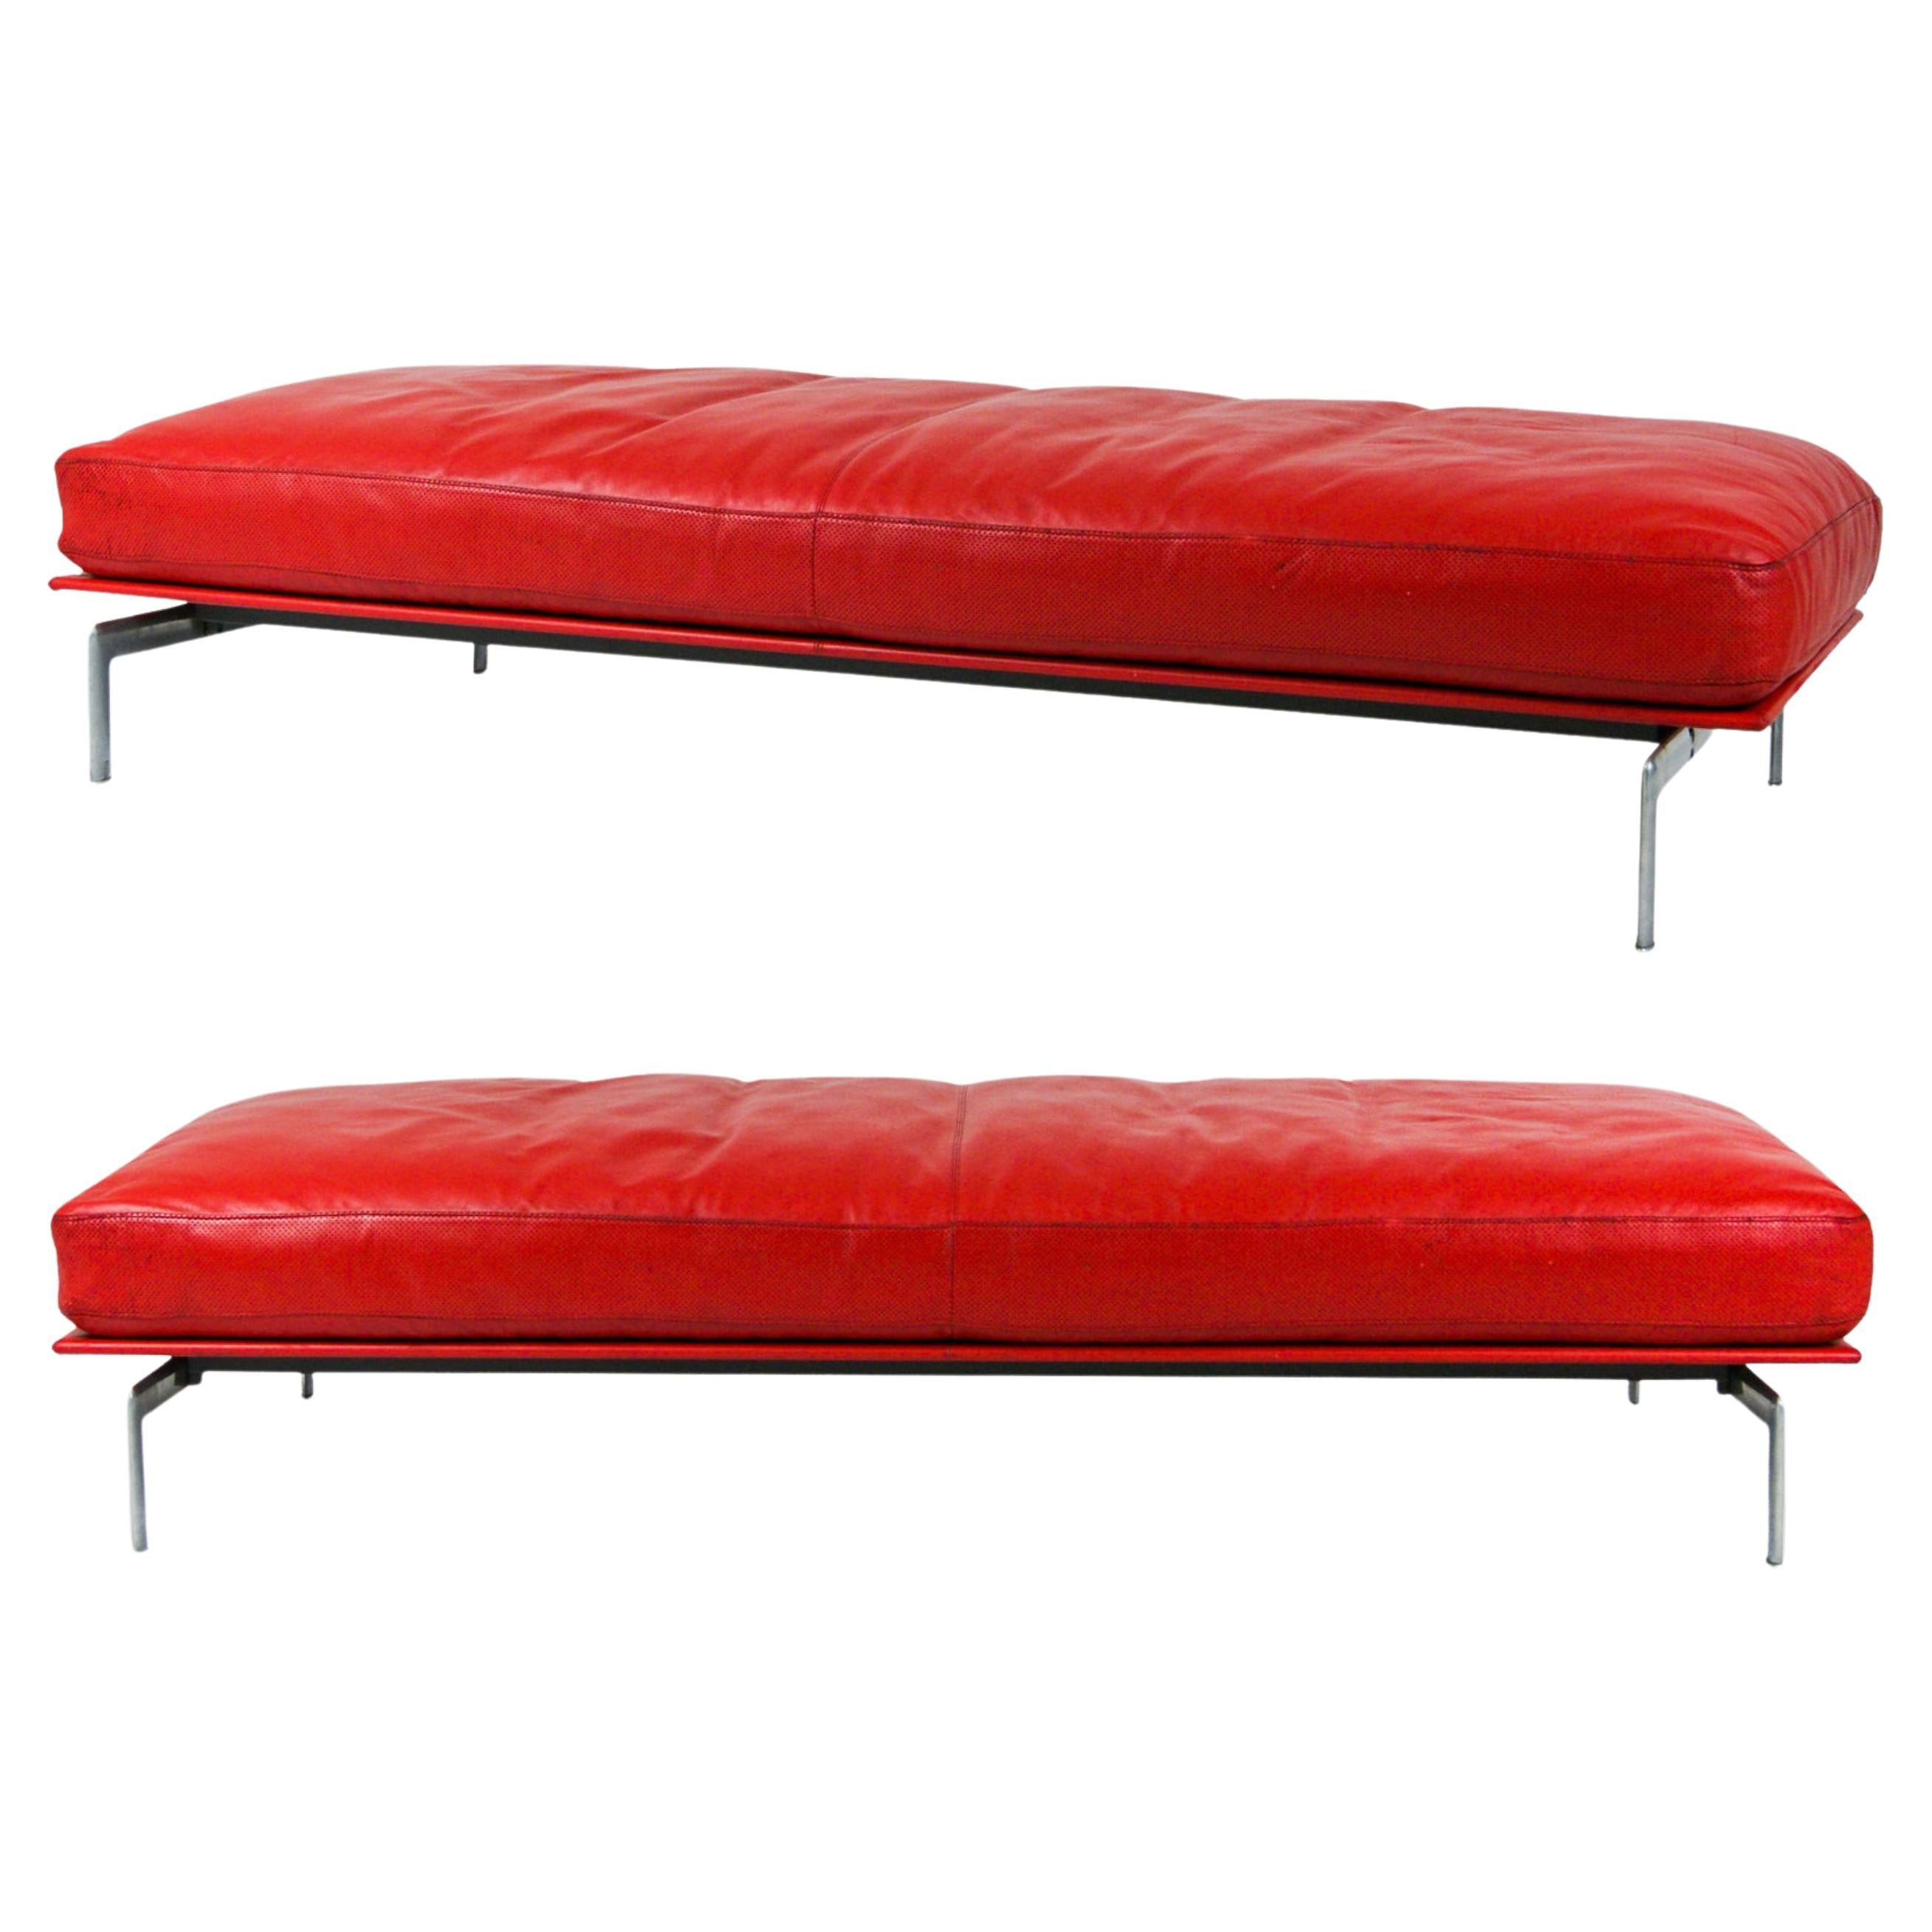 Pair Diesis Daybeds or Benches by Paolo Nava & Antonio Citterio for B&B Italia